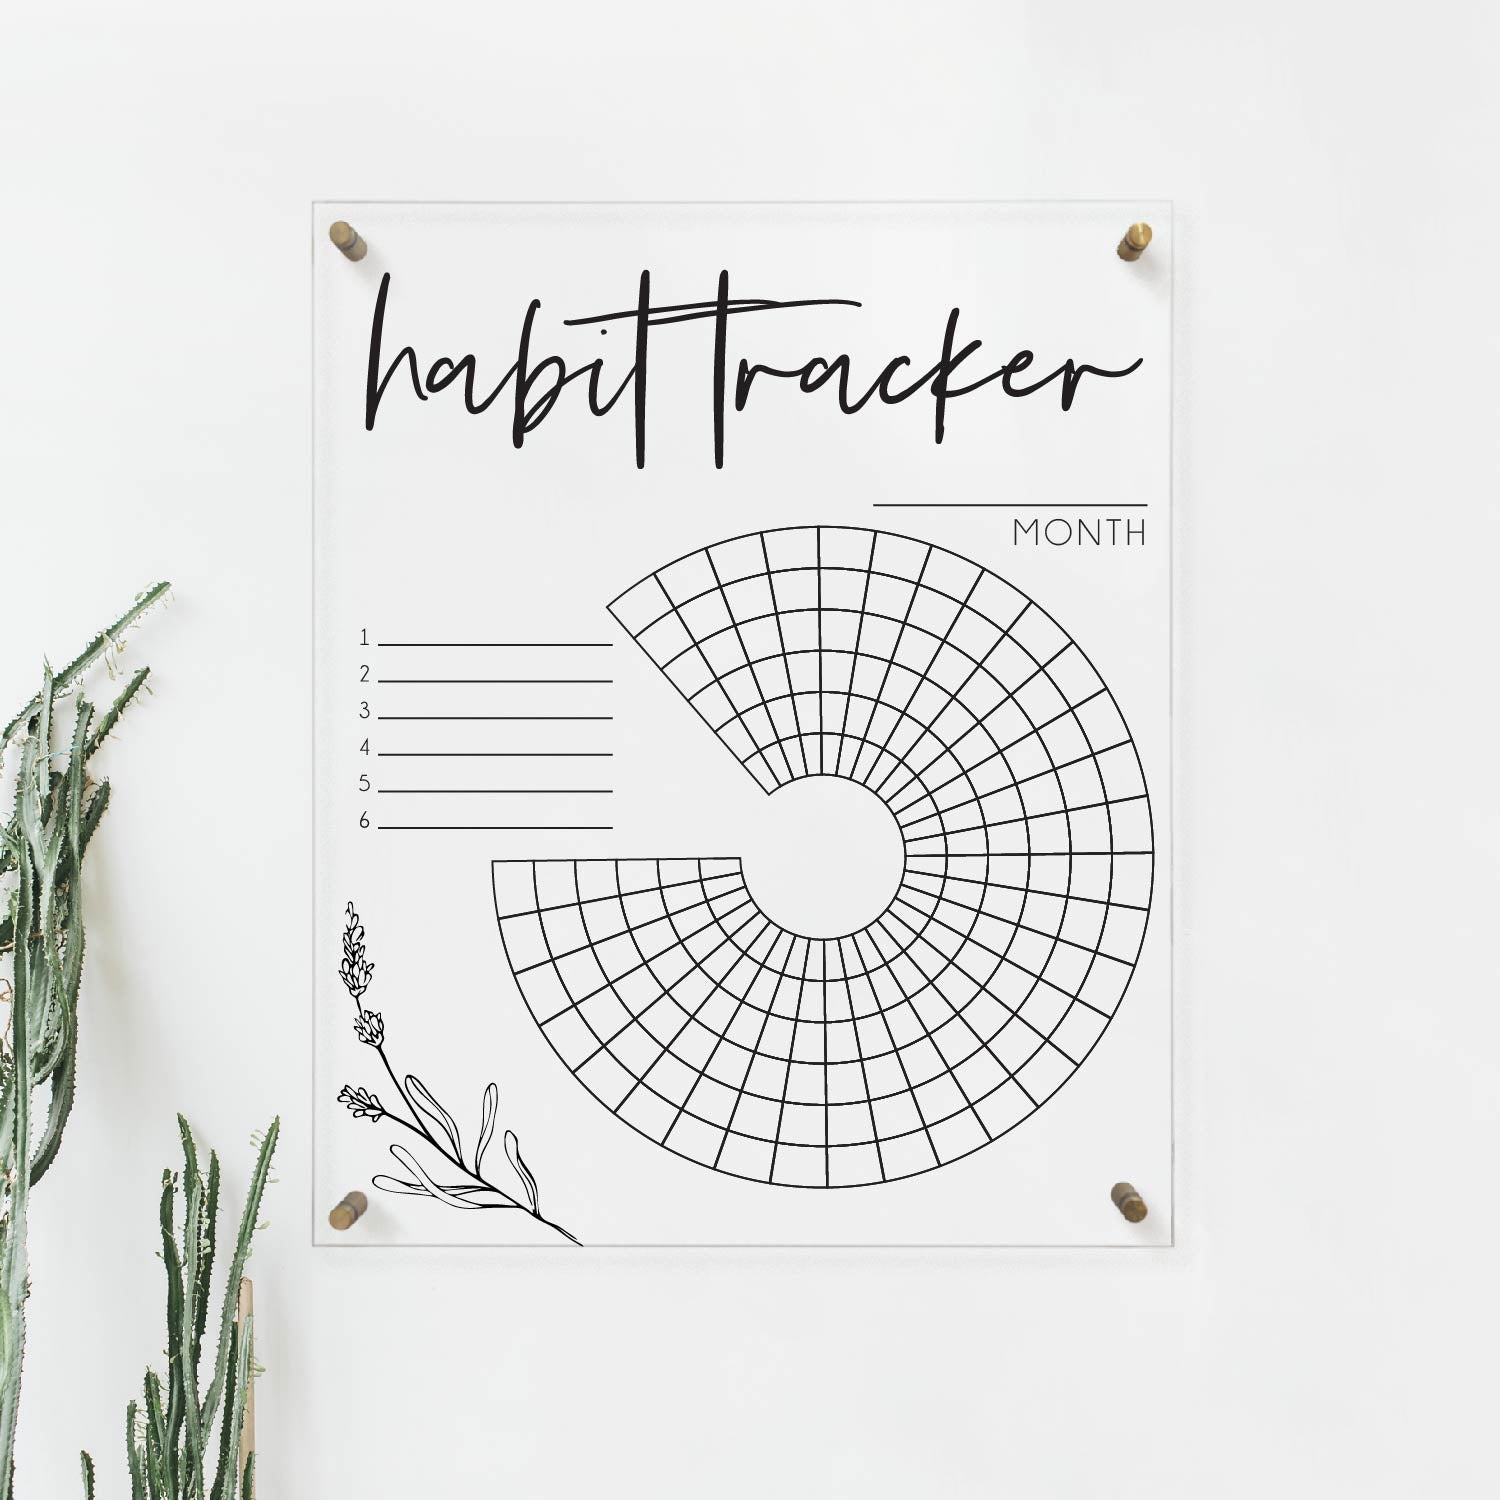 Acrylic Habit Tracker for Wall | Dry Erase Calendar | Clear Command Center Habit Tracker - SCC-274 - SCC Signs